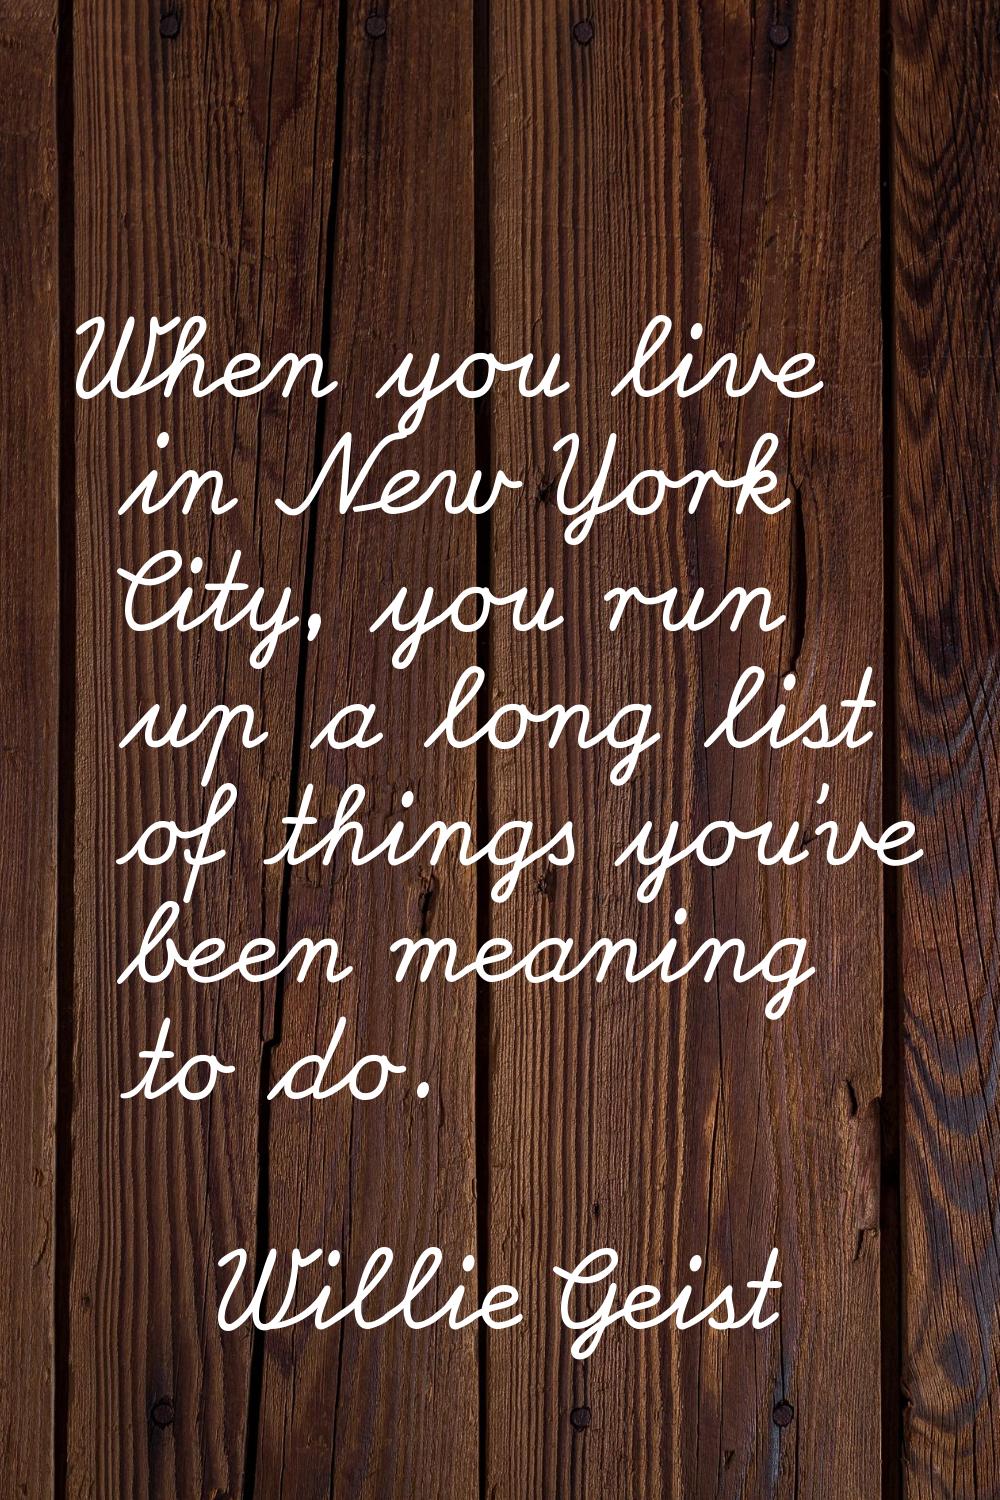 When you live in New York City, you run up a long list of things you've been meaning to do.